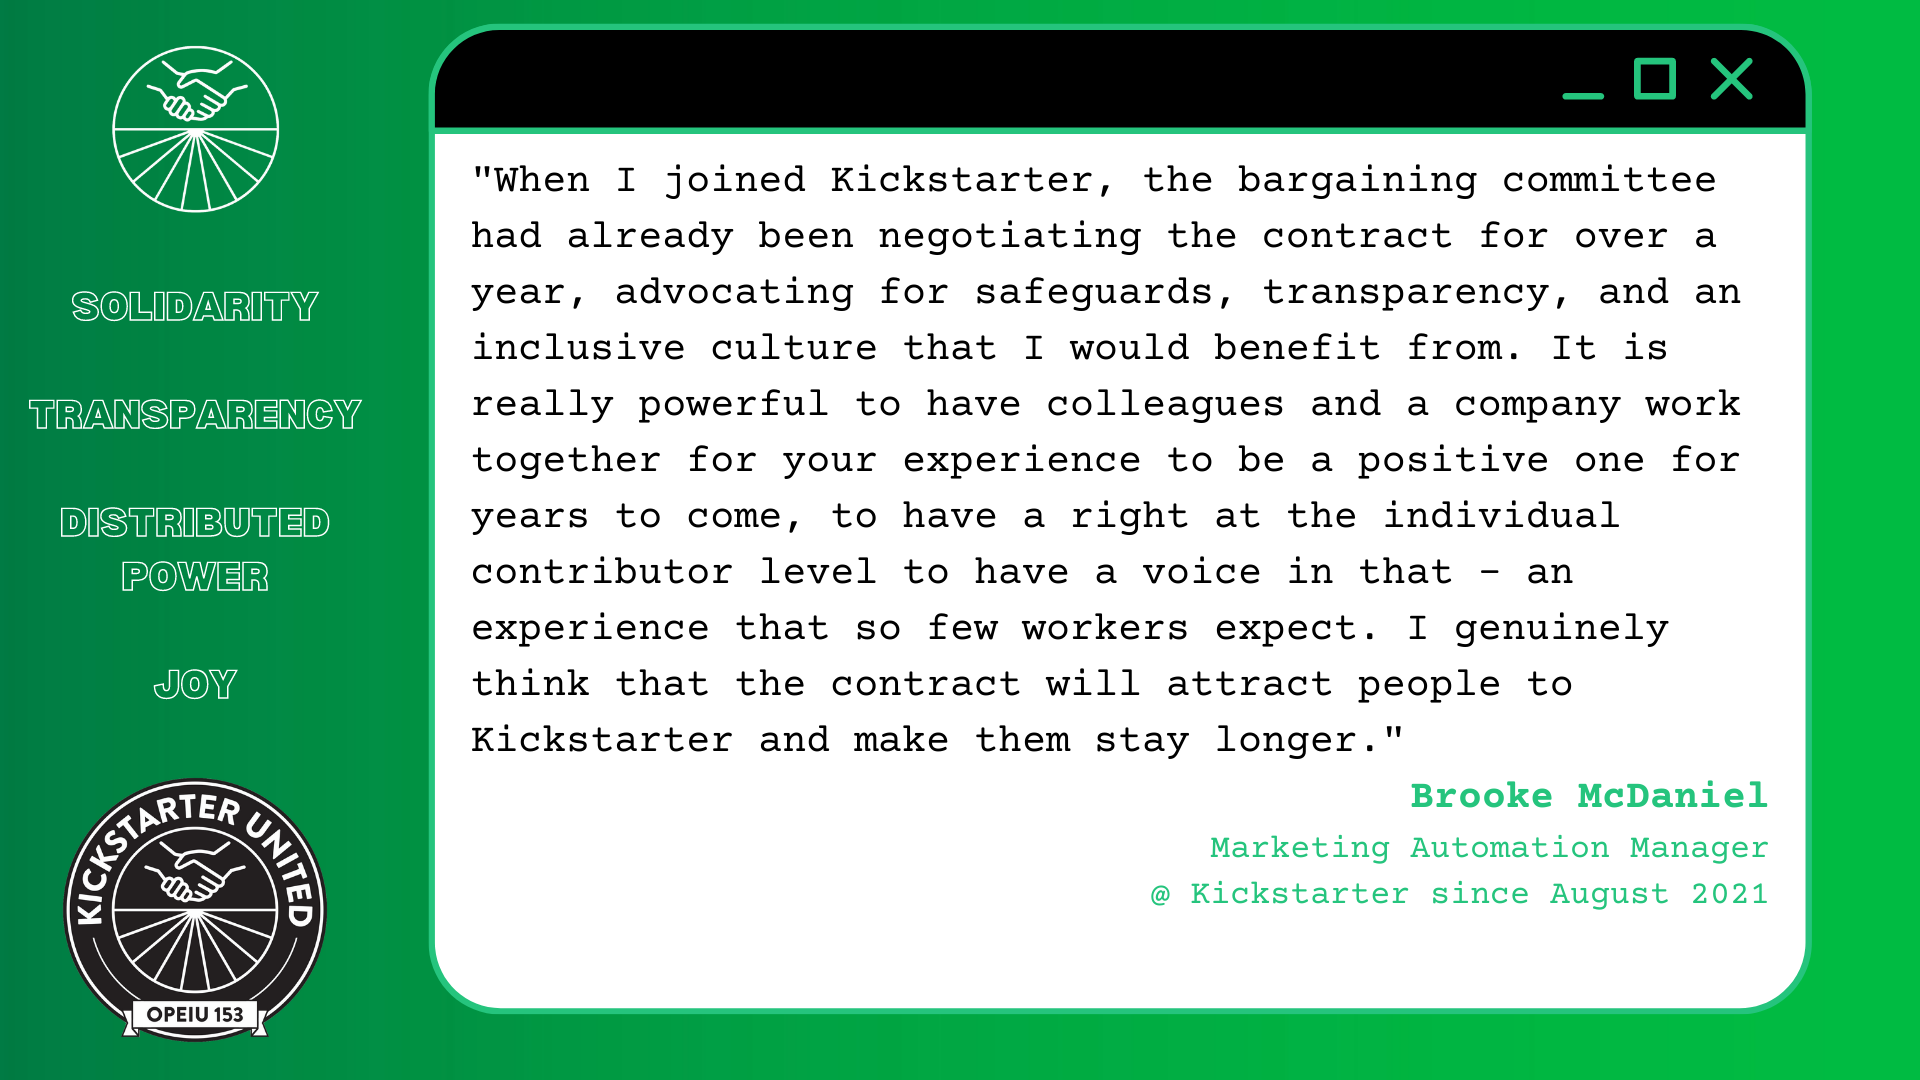 "When I joined Kickstarter, the bargaining committee had already been negotiating the contract for over a year, advocating for safeguards, transparency, and an inclusive culture that I would benefit from. It is really powerful to have colleagues and a company work together for your experience to be a positive one for years to come, to have a right at the individual contributor level to have a voice in that - an experience that so few workers expect. I genuinely think that the contract will attract people to Kickstarter and make them stay longer" Brooke McDaniel, Marketing Automation Manager @ Kickstarter since August 2021